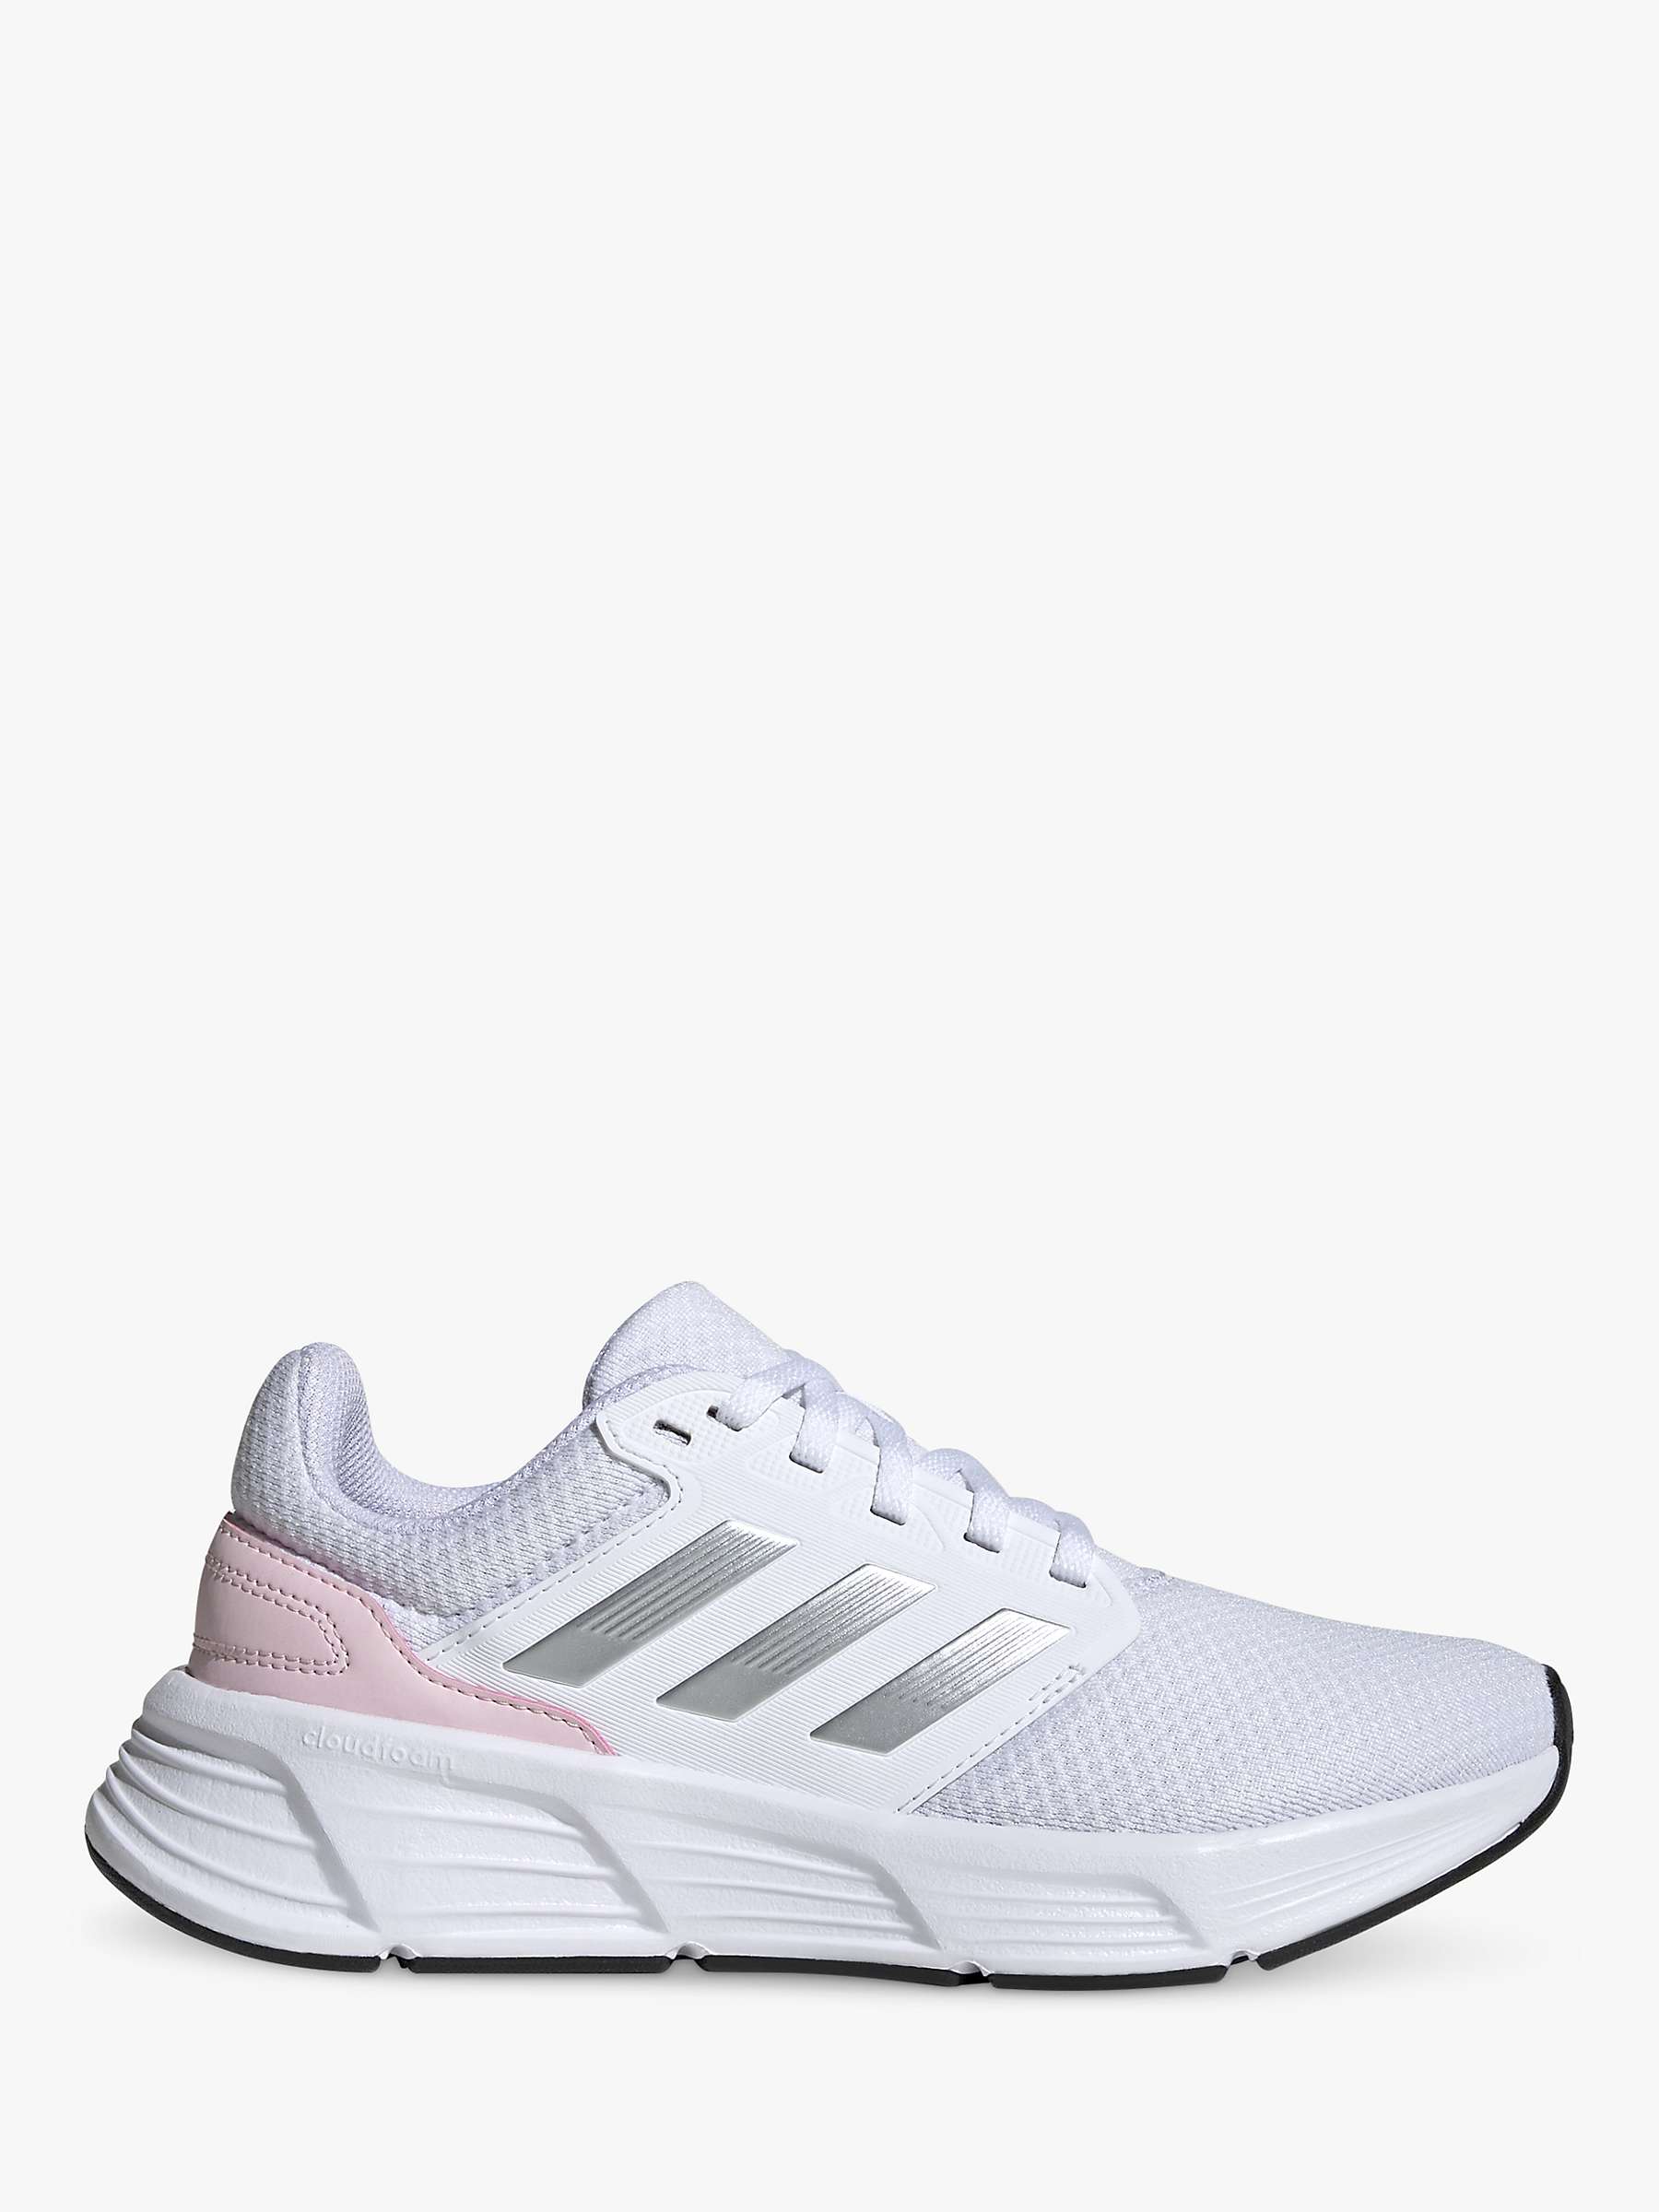 Buy adidas Galaxy 6 Women's Running Shoes Online at johnlewis.com